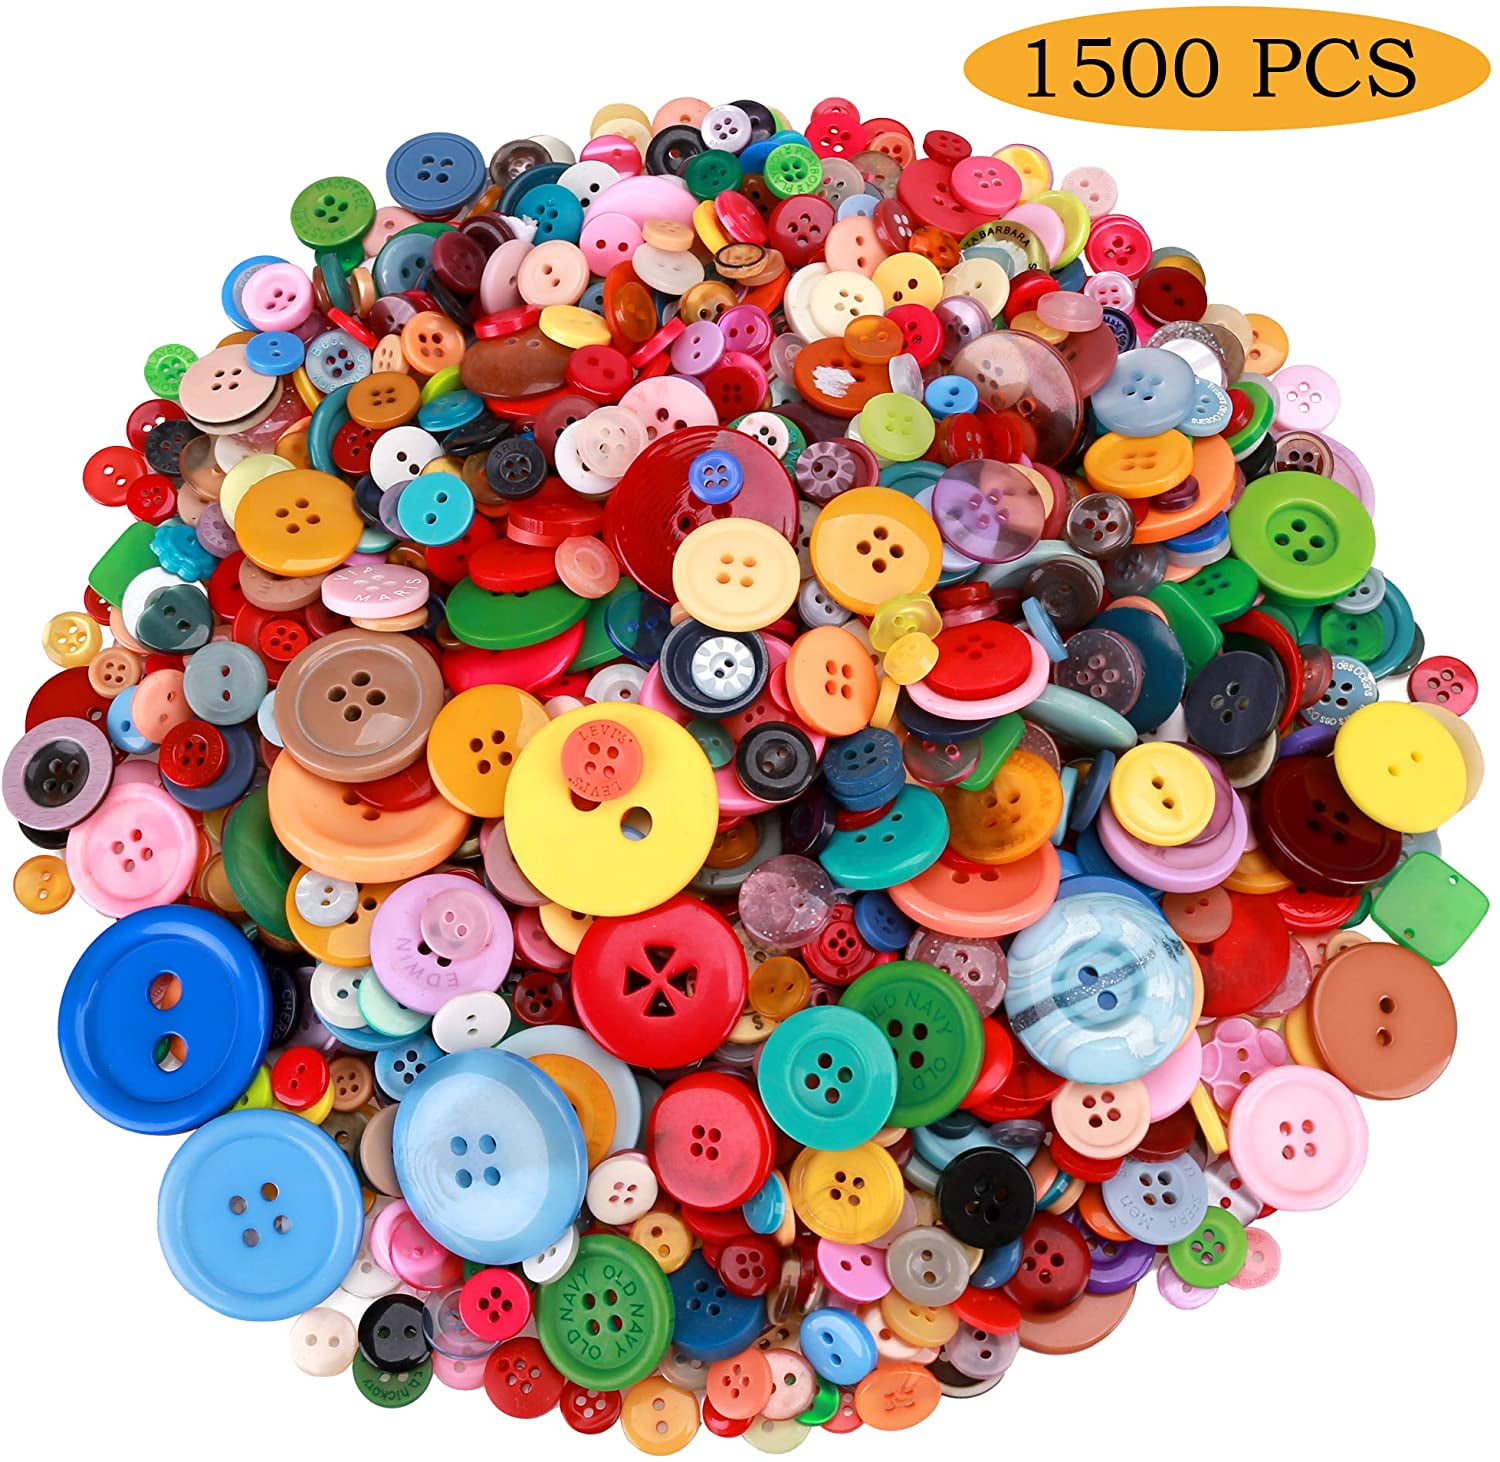 Bedeone 1000 Pcs Assorted Buttons For Crafts, Resin Buttons For